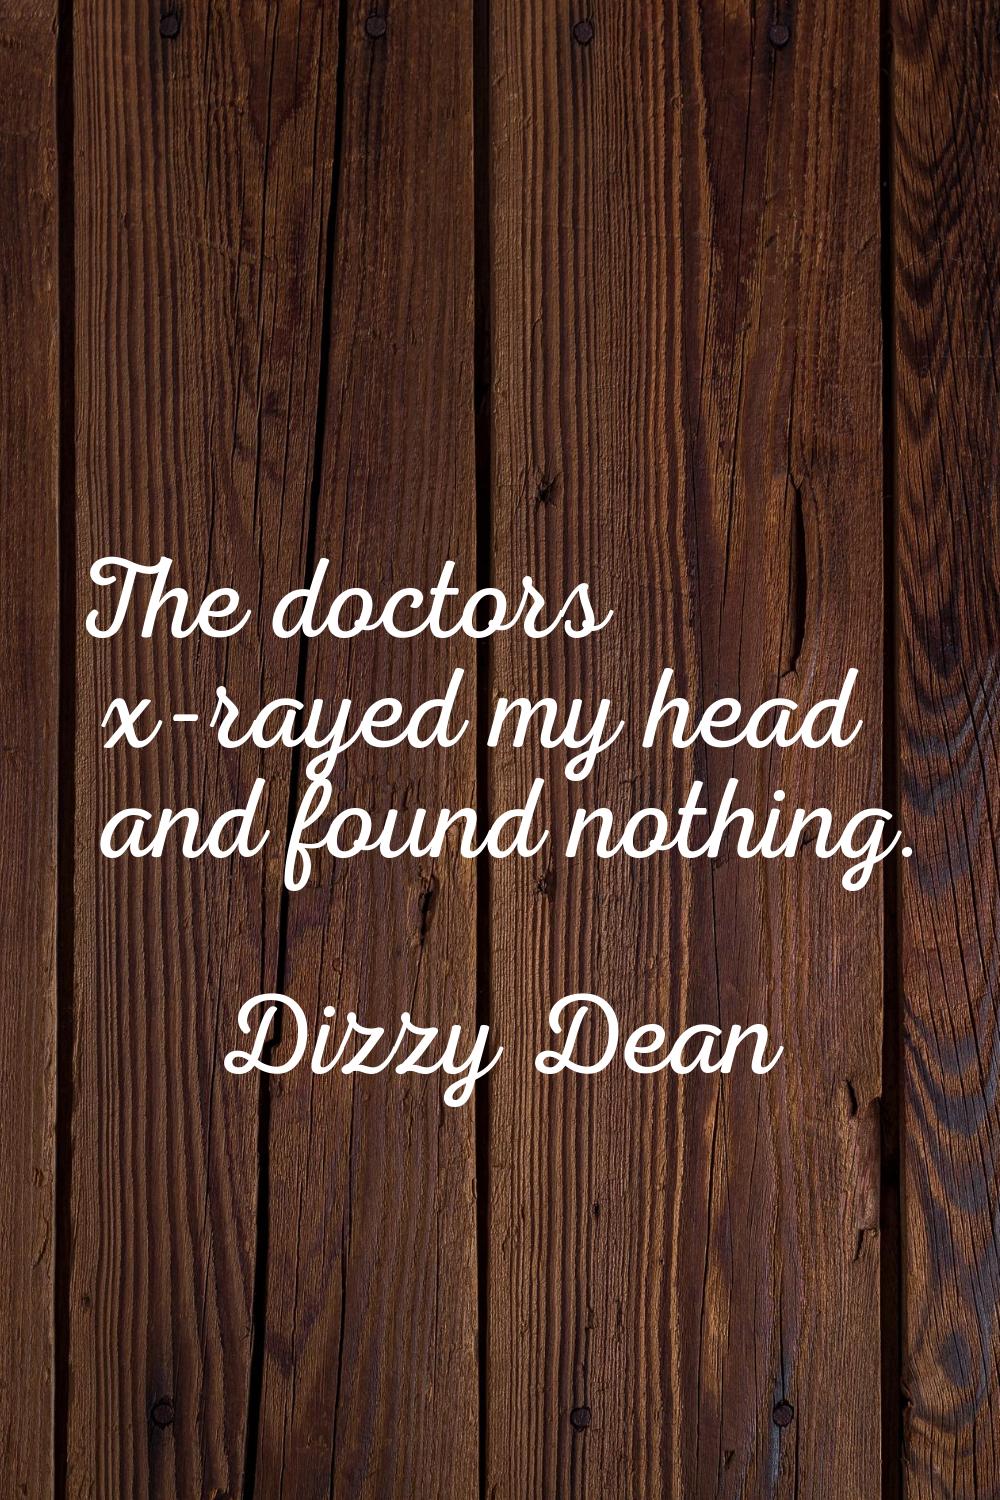 The doctors x-rayed my head and found nothing.